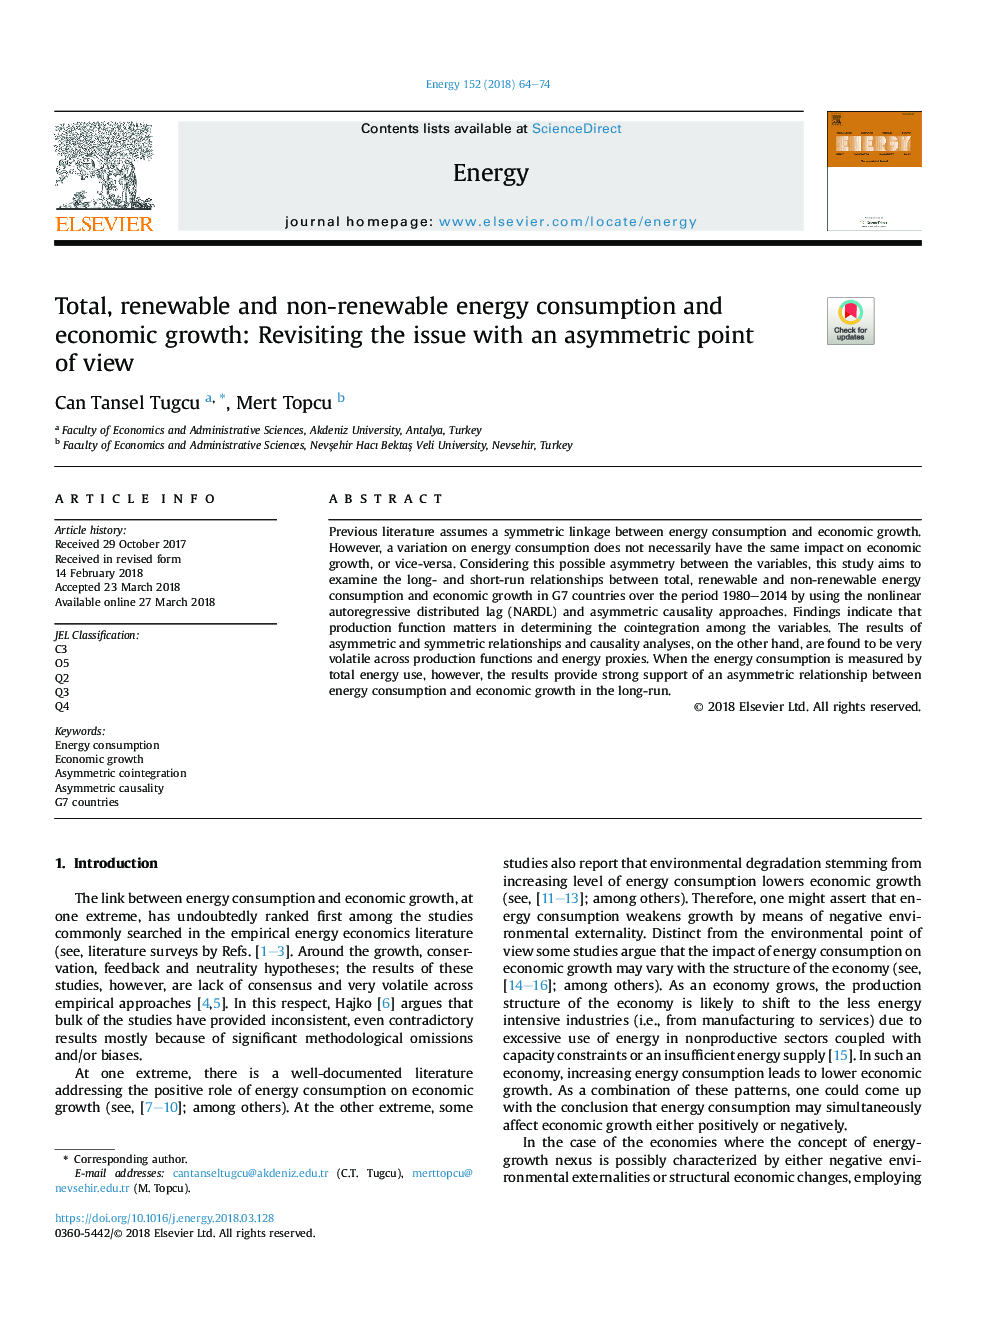 Total, renewable and non-renewable energy consumption and economic growth: Revisiting the issue with an asymmetric point ofÂ view